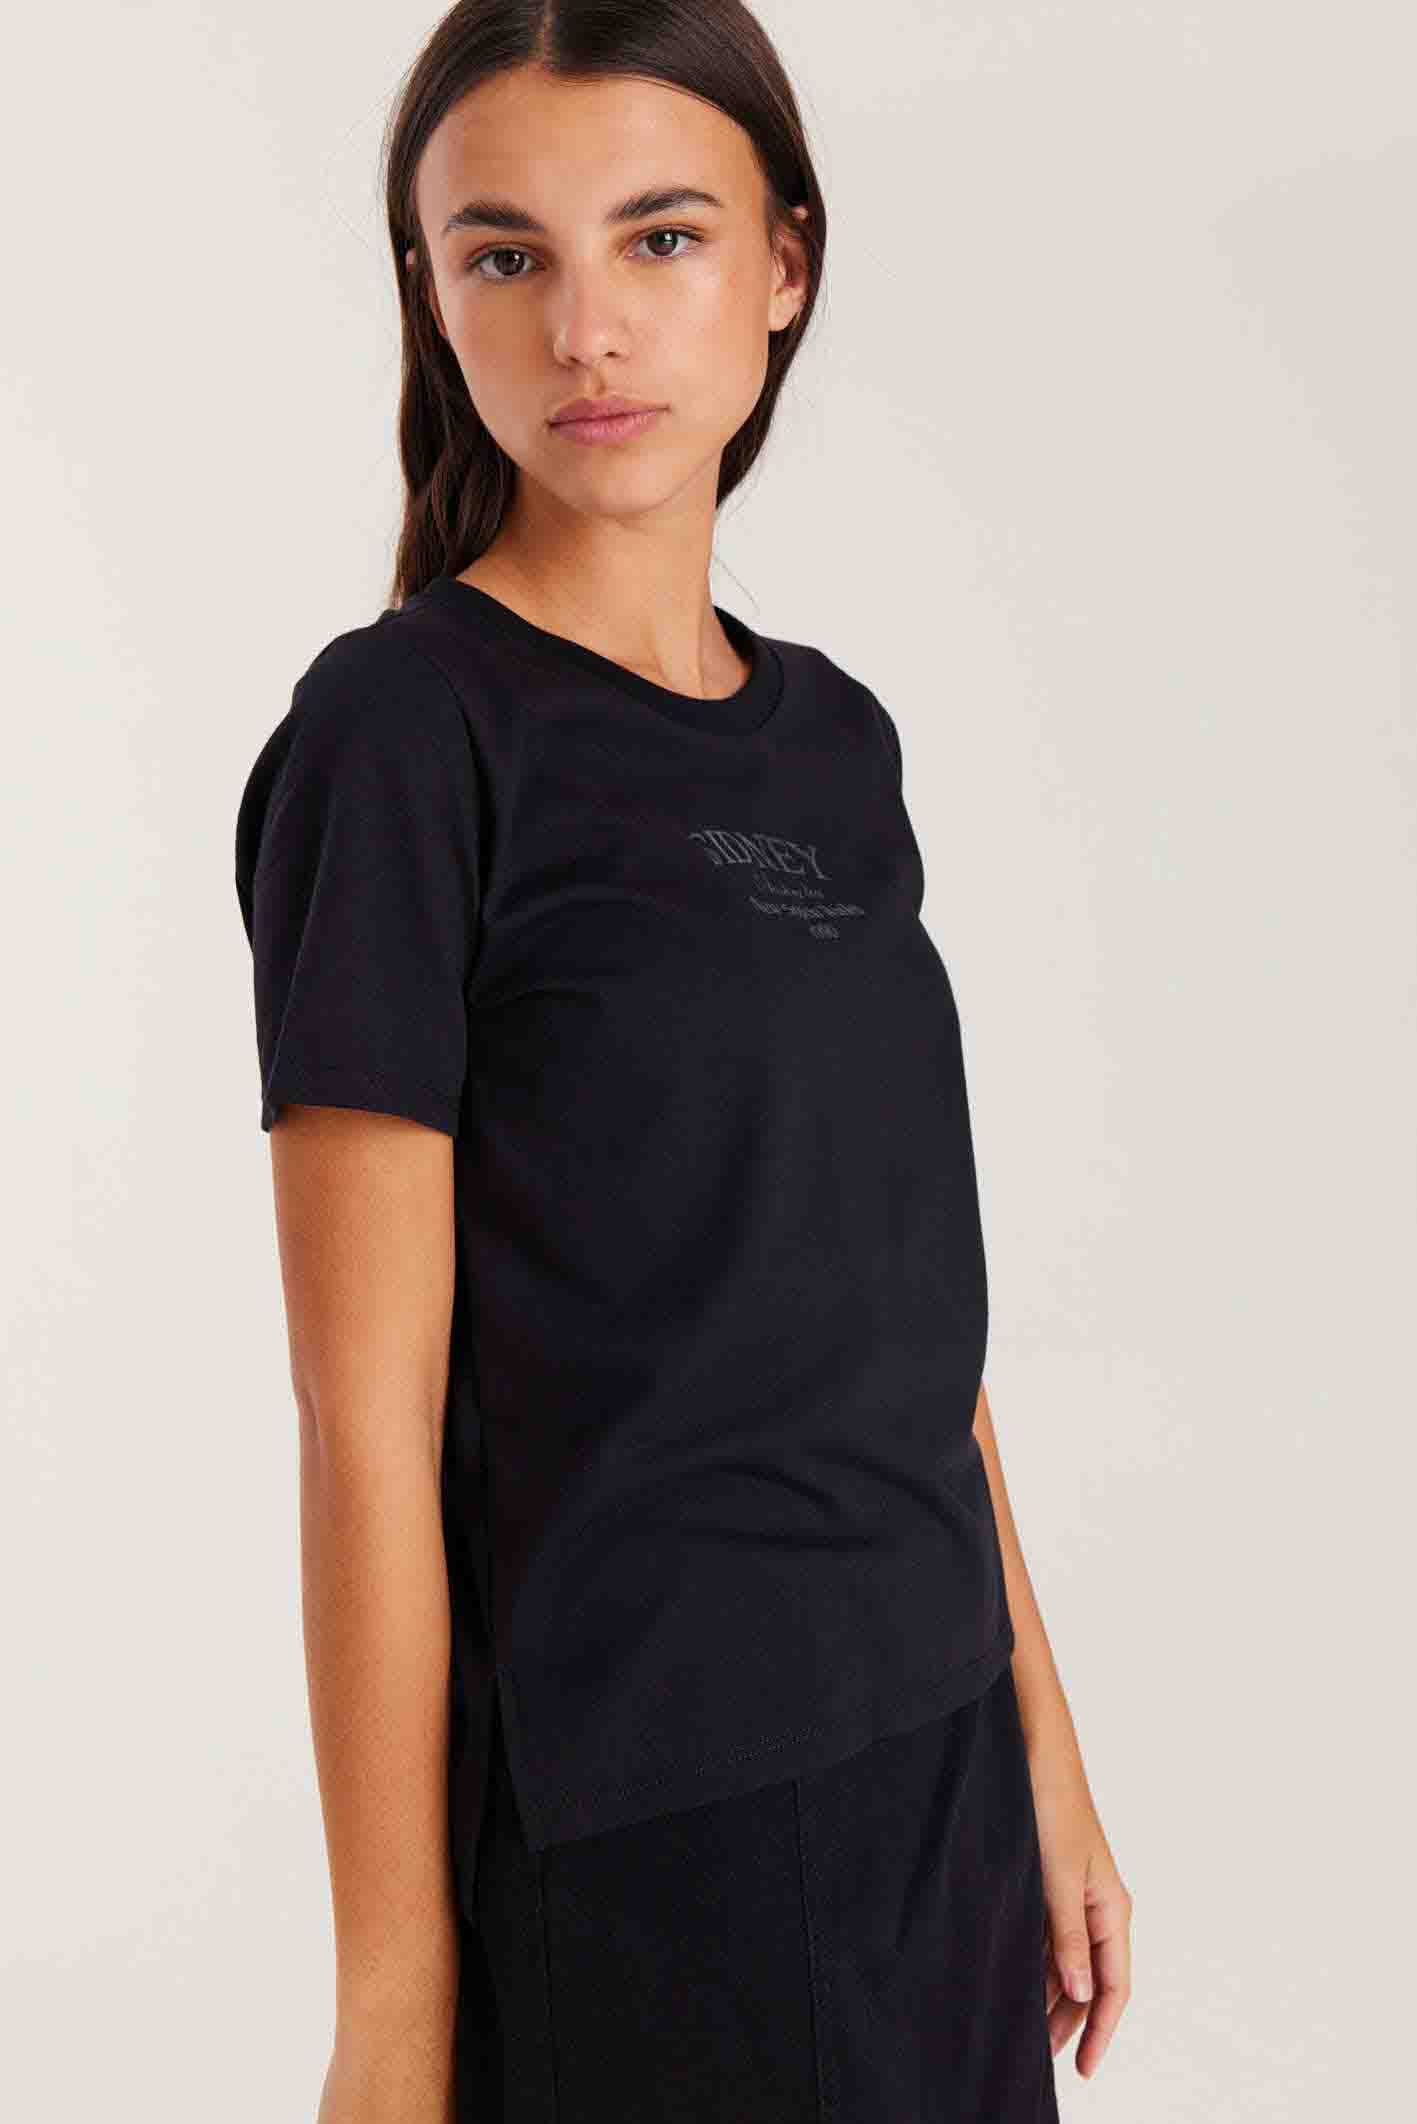 comoquieres_remera-sidney-xs-l_00-08-2024__picture-43729